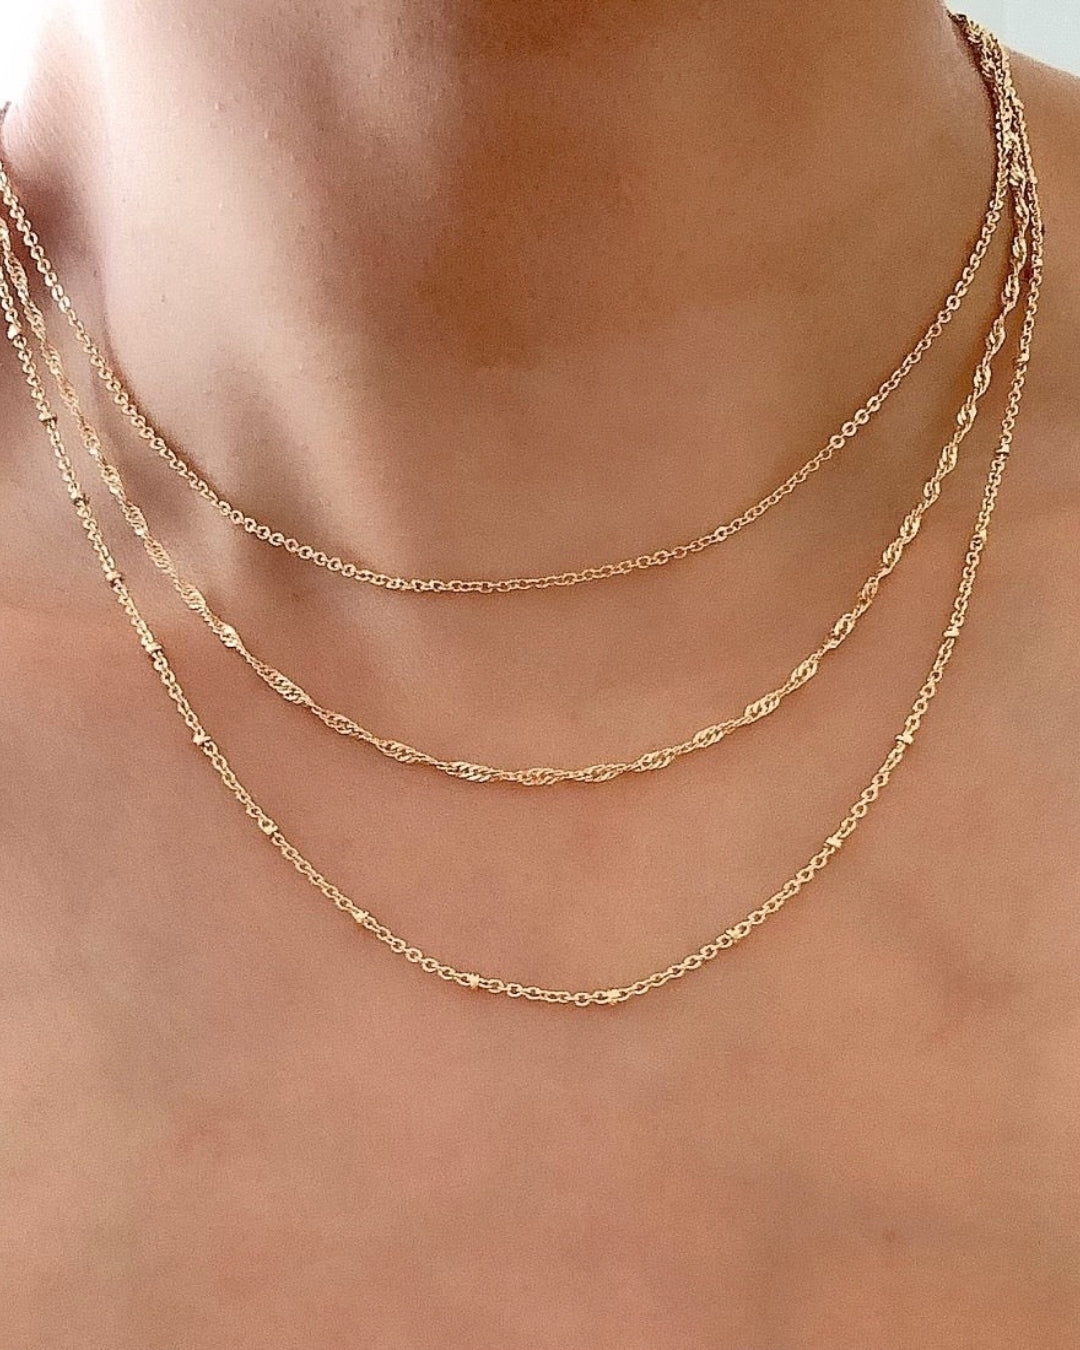 14k yellow gold fill singapore rope chain necklace on a model 